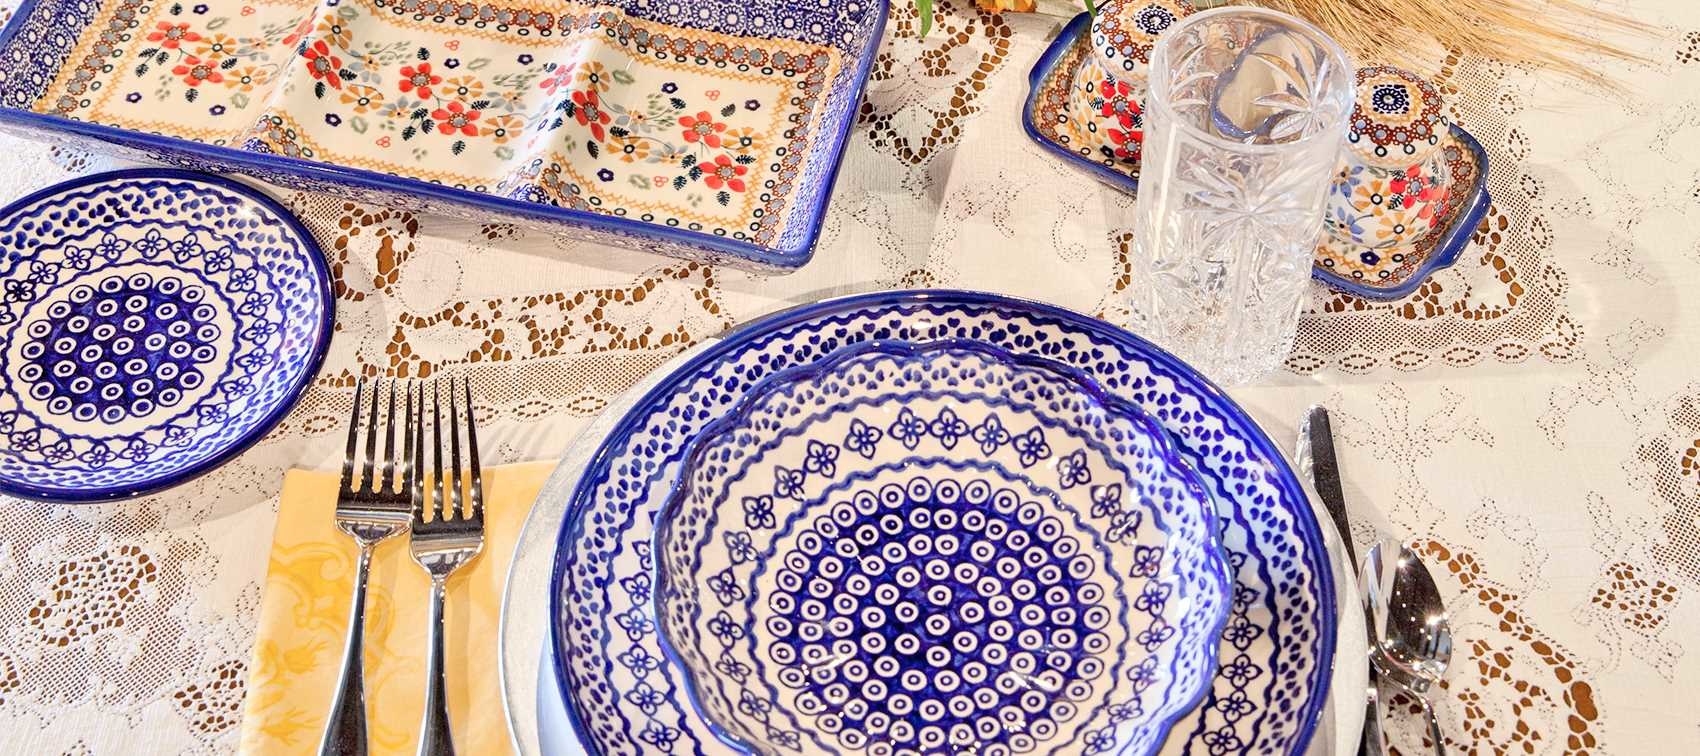 Fill Your Bridal Registry With Beautiful Polish Pottery Plates